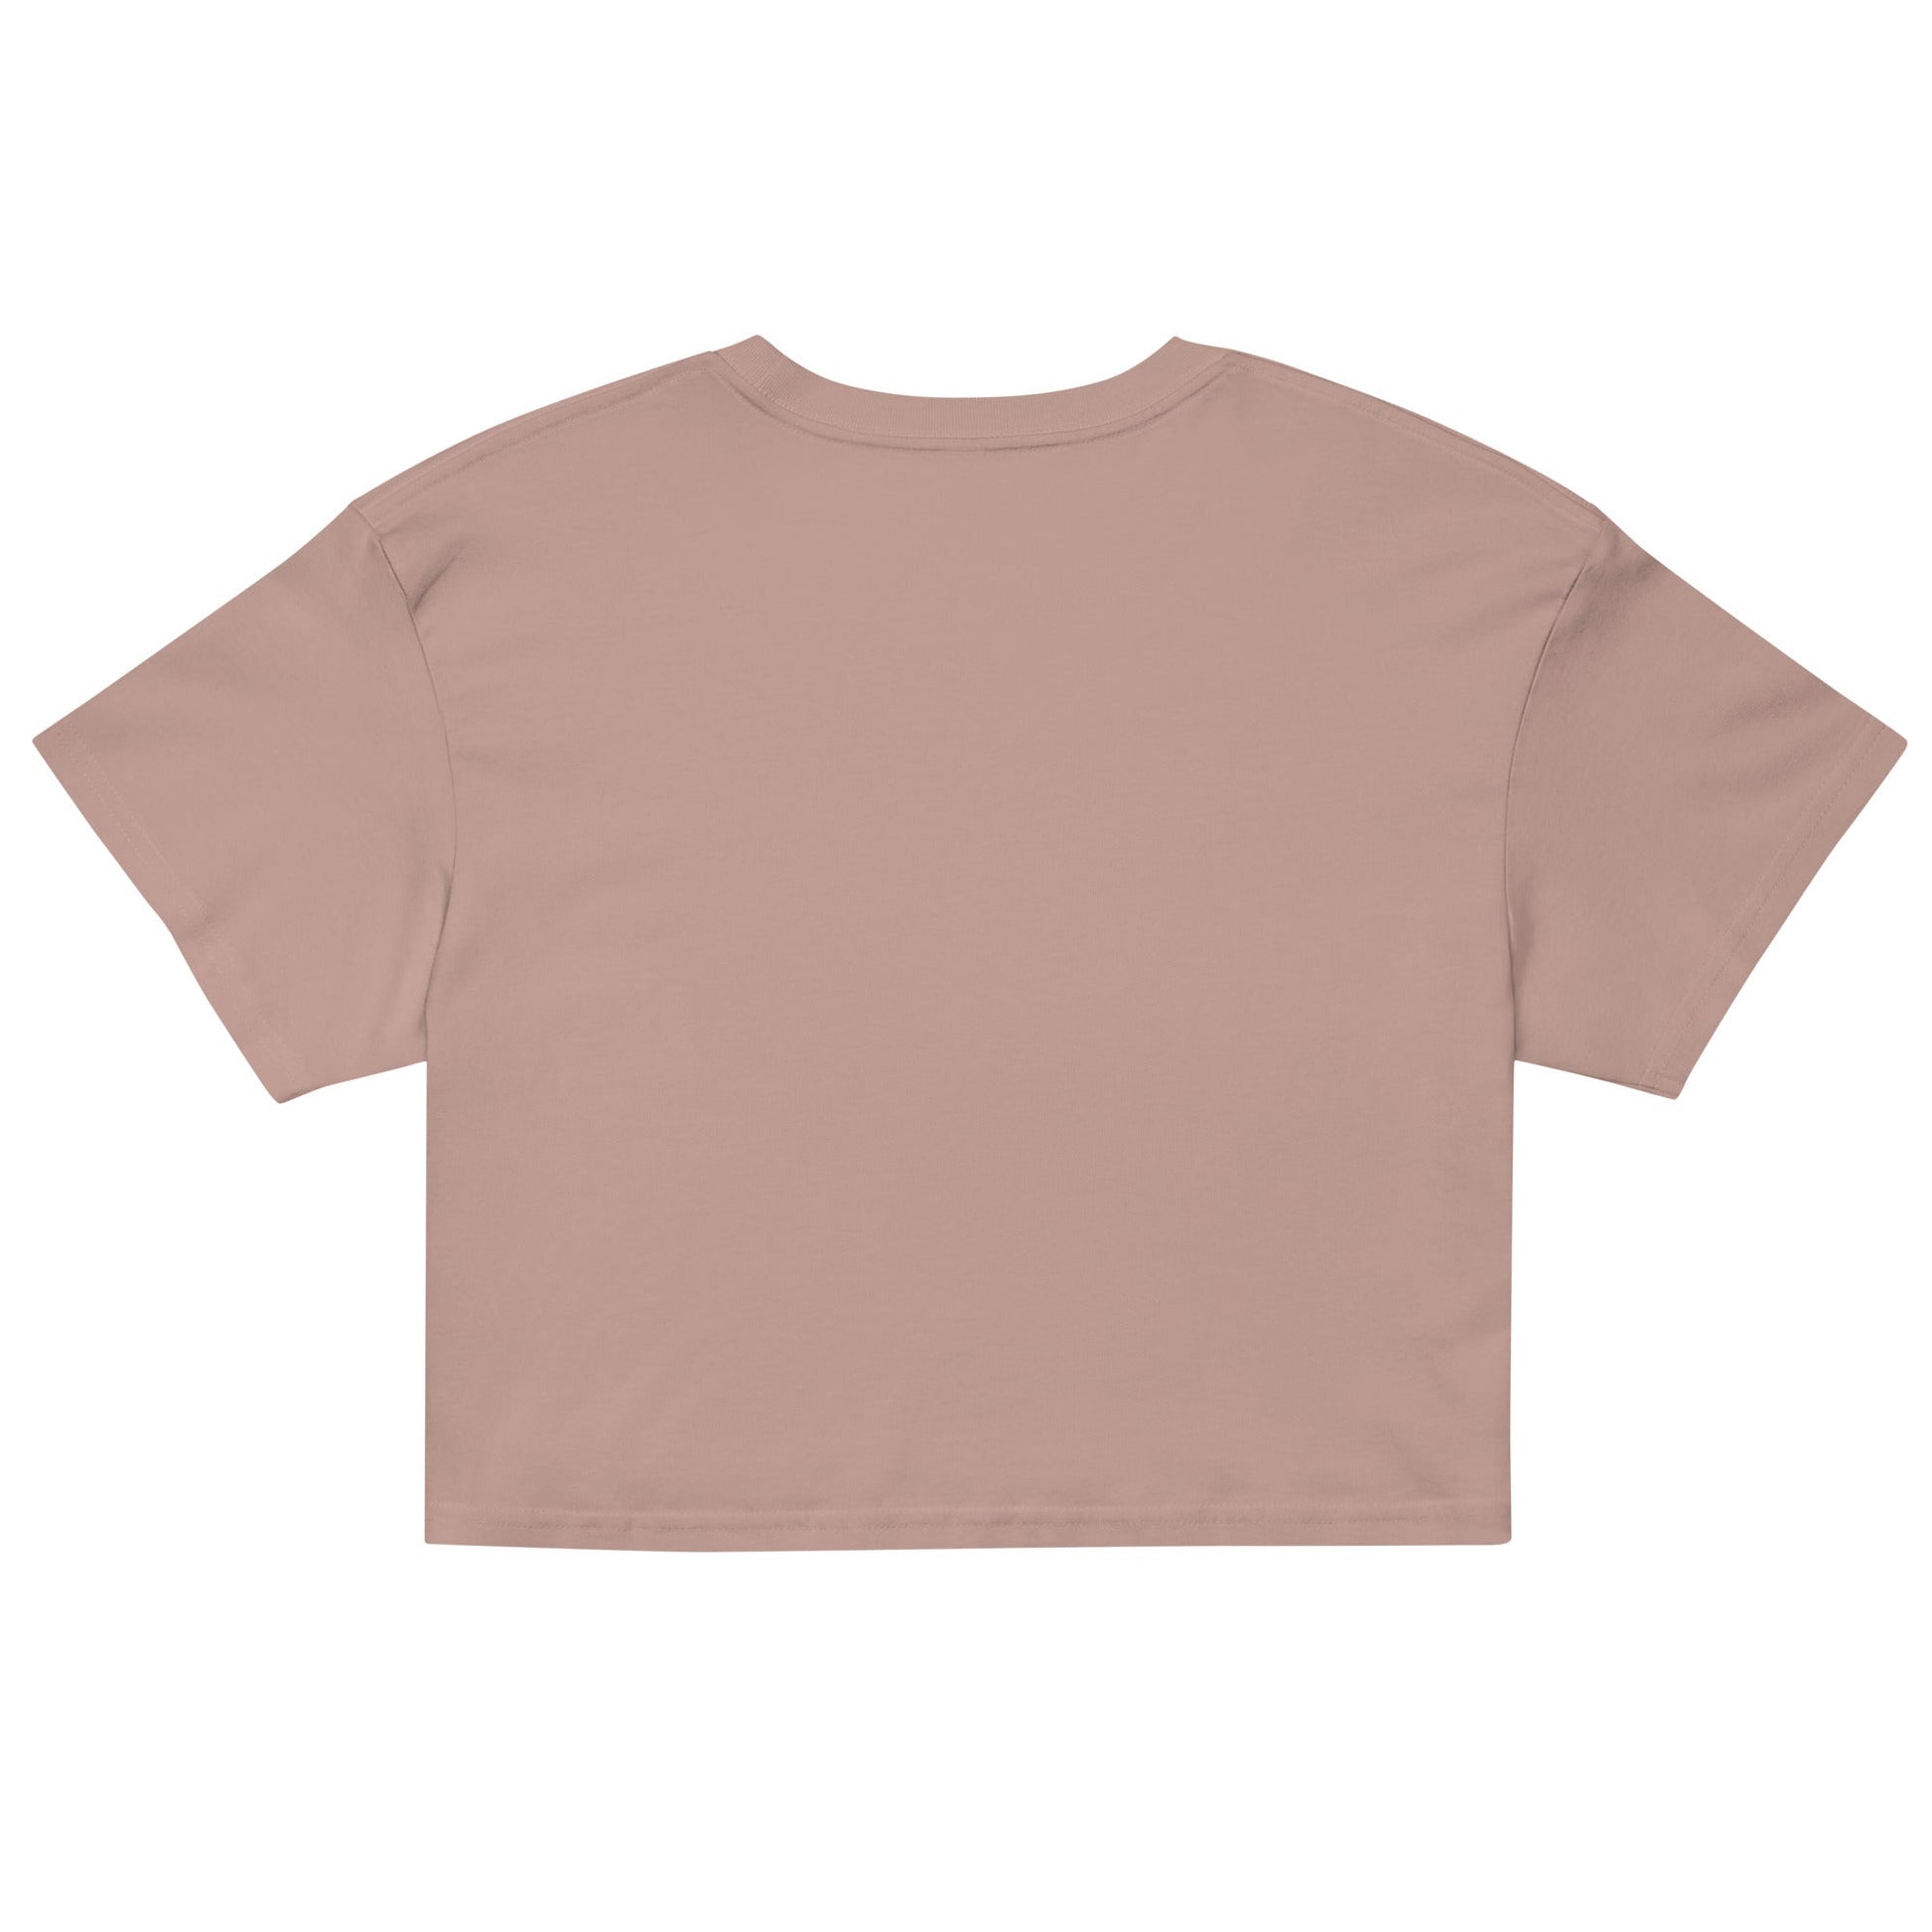 Kennedy Classic Women's Cropped Tee - TEAM KENNEDY. All rights reserved